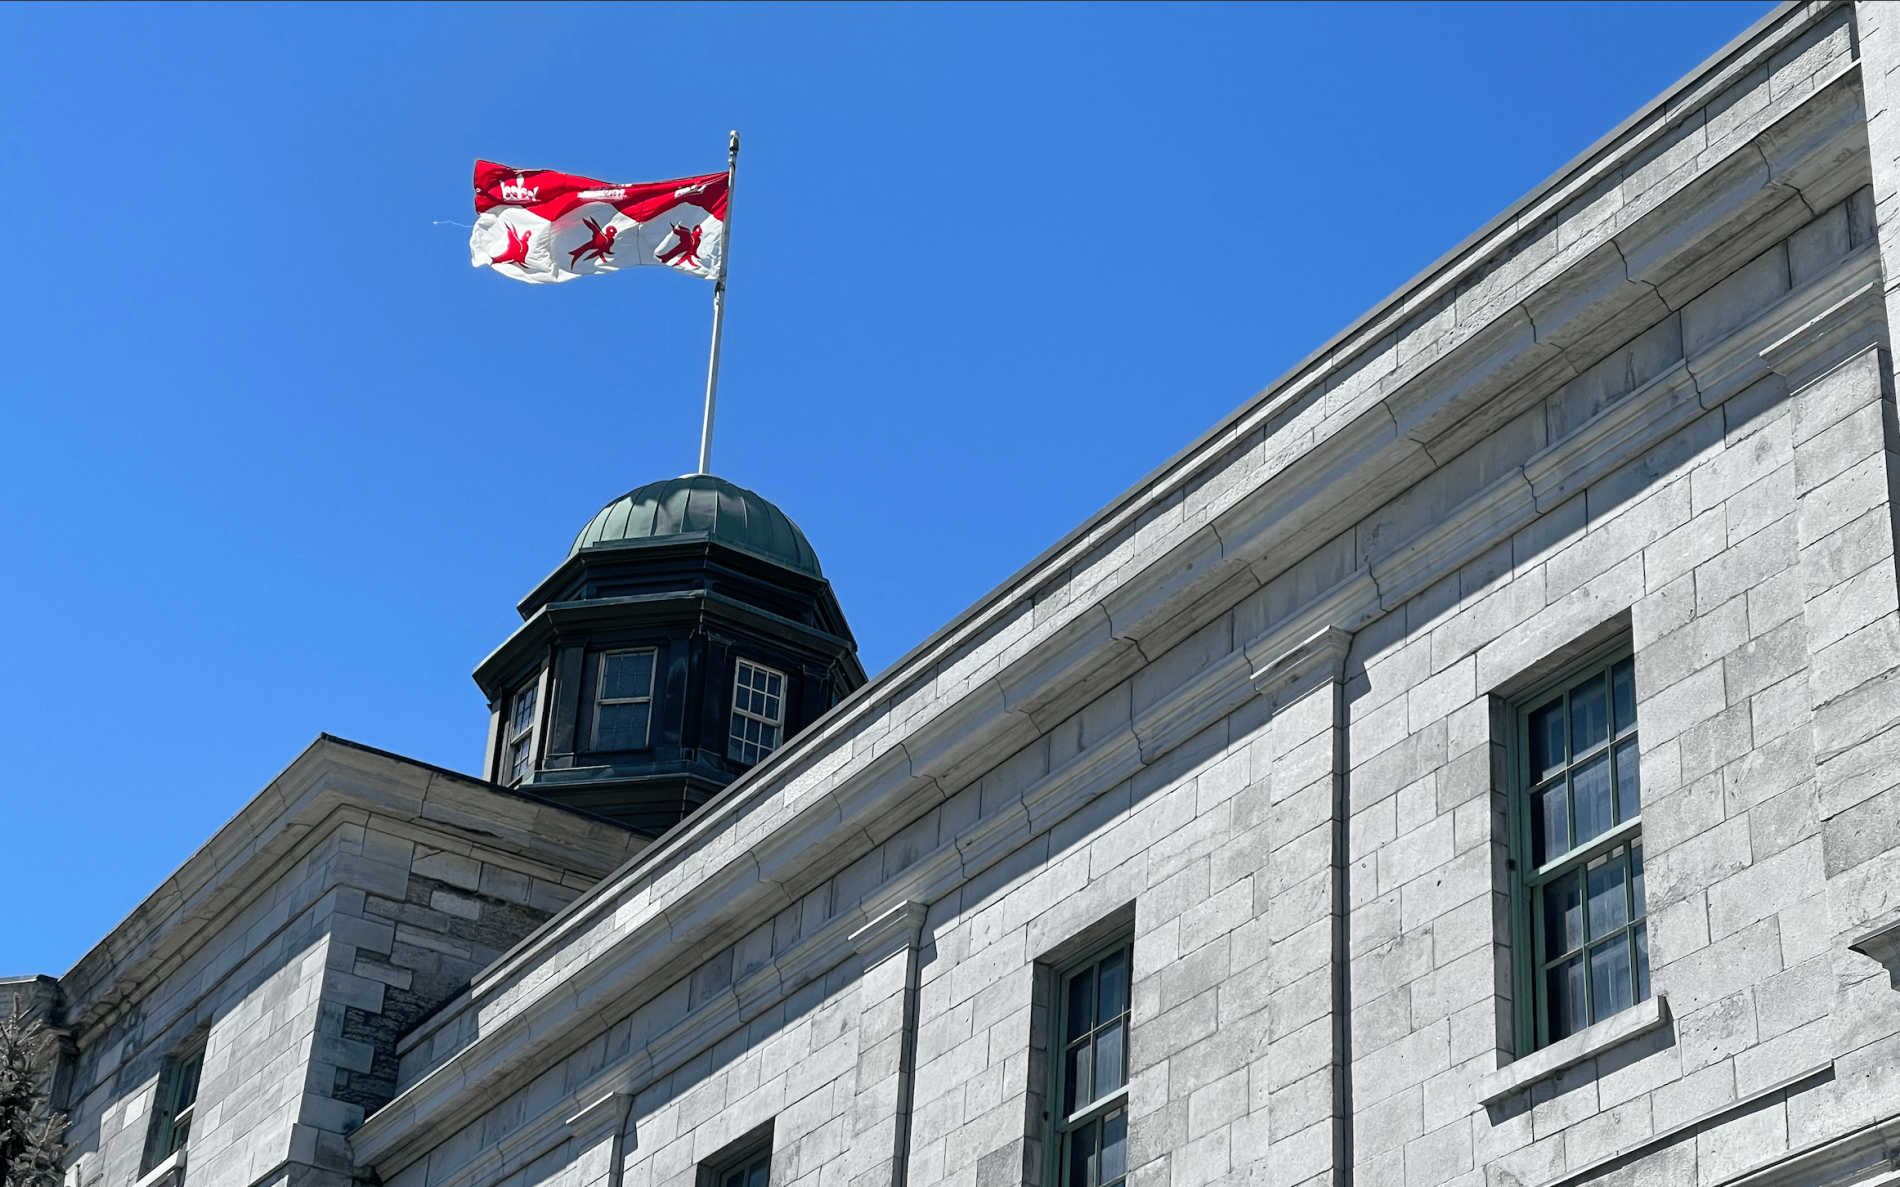 The McGill flag flies above the Arts Building